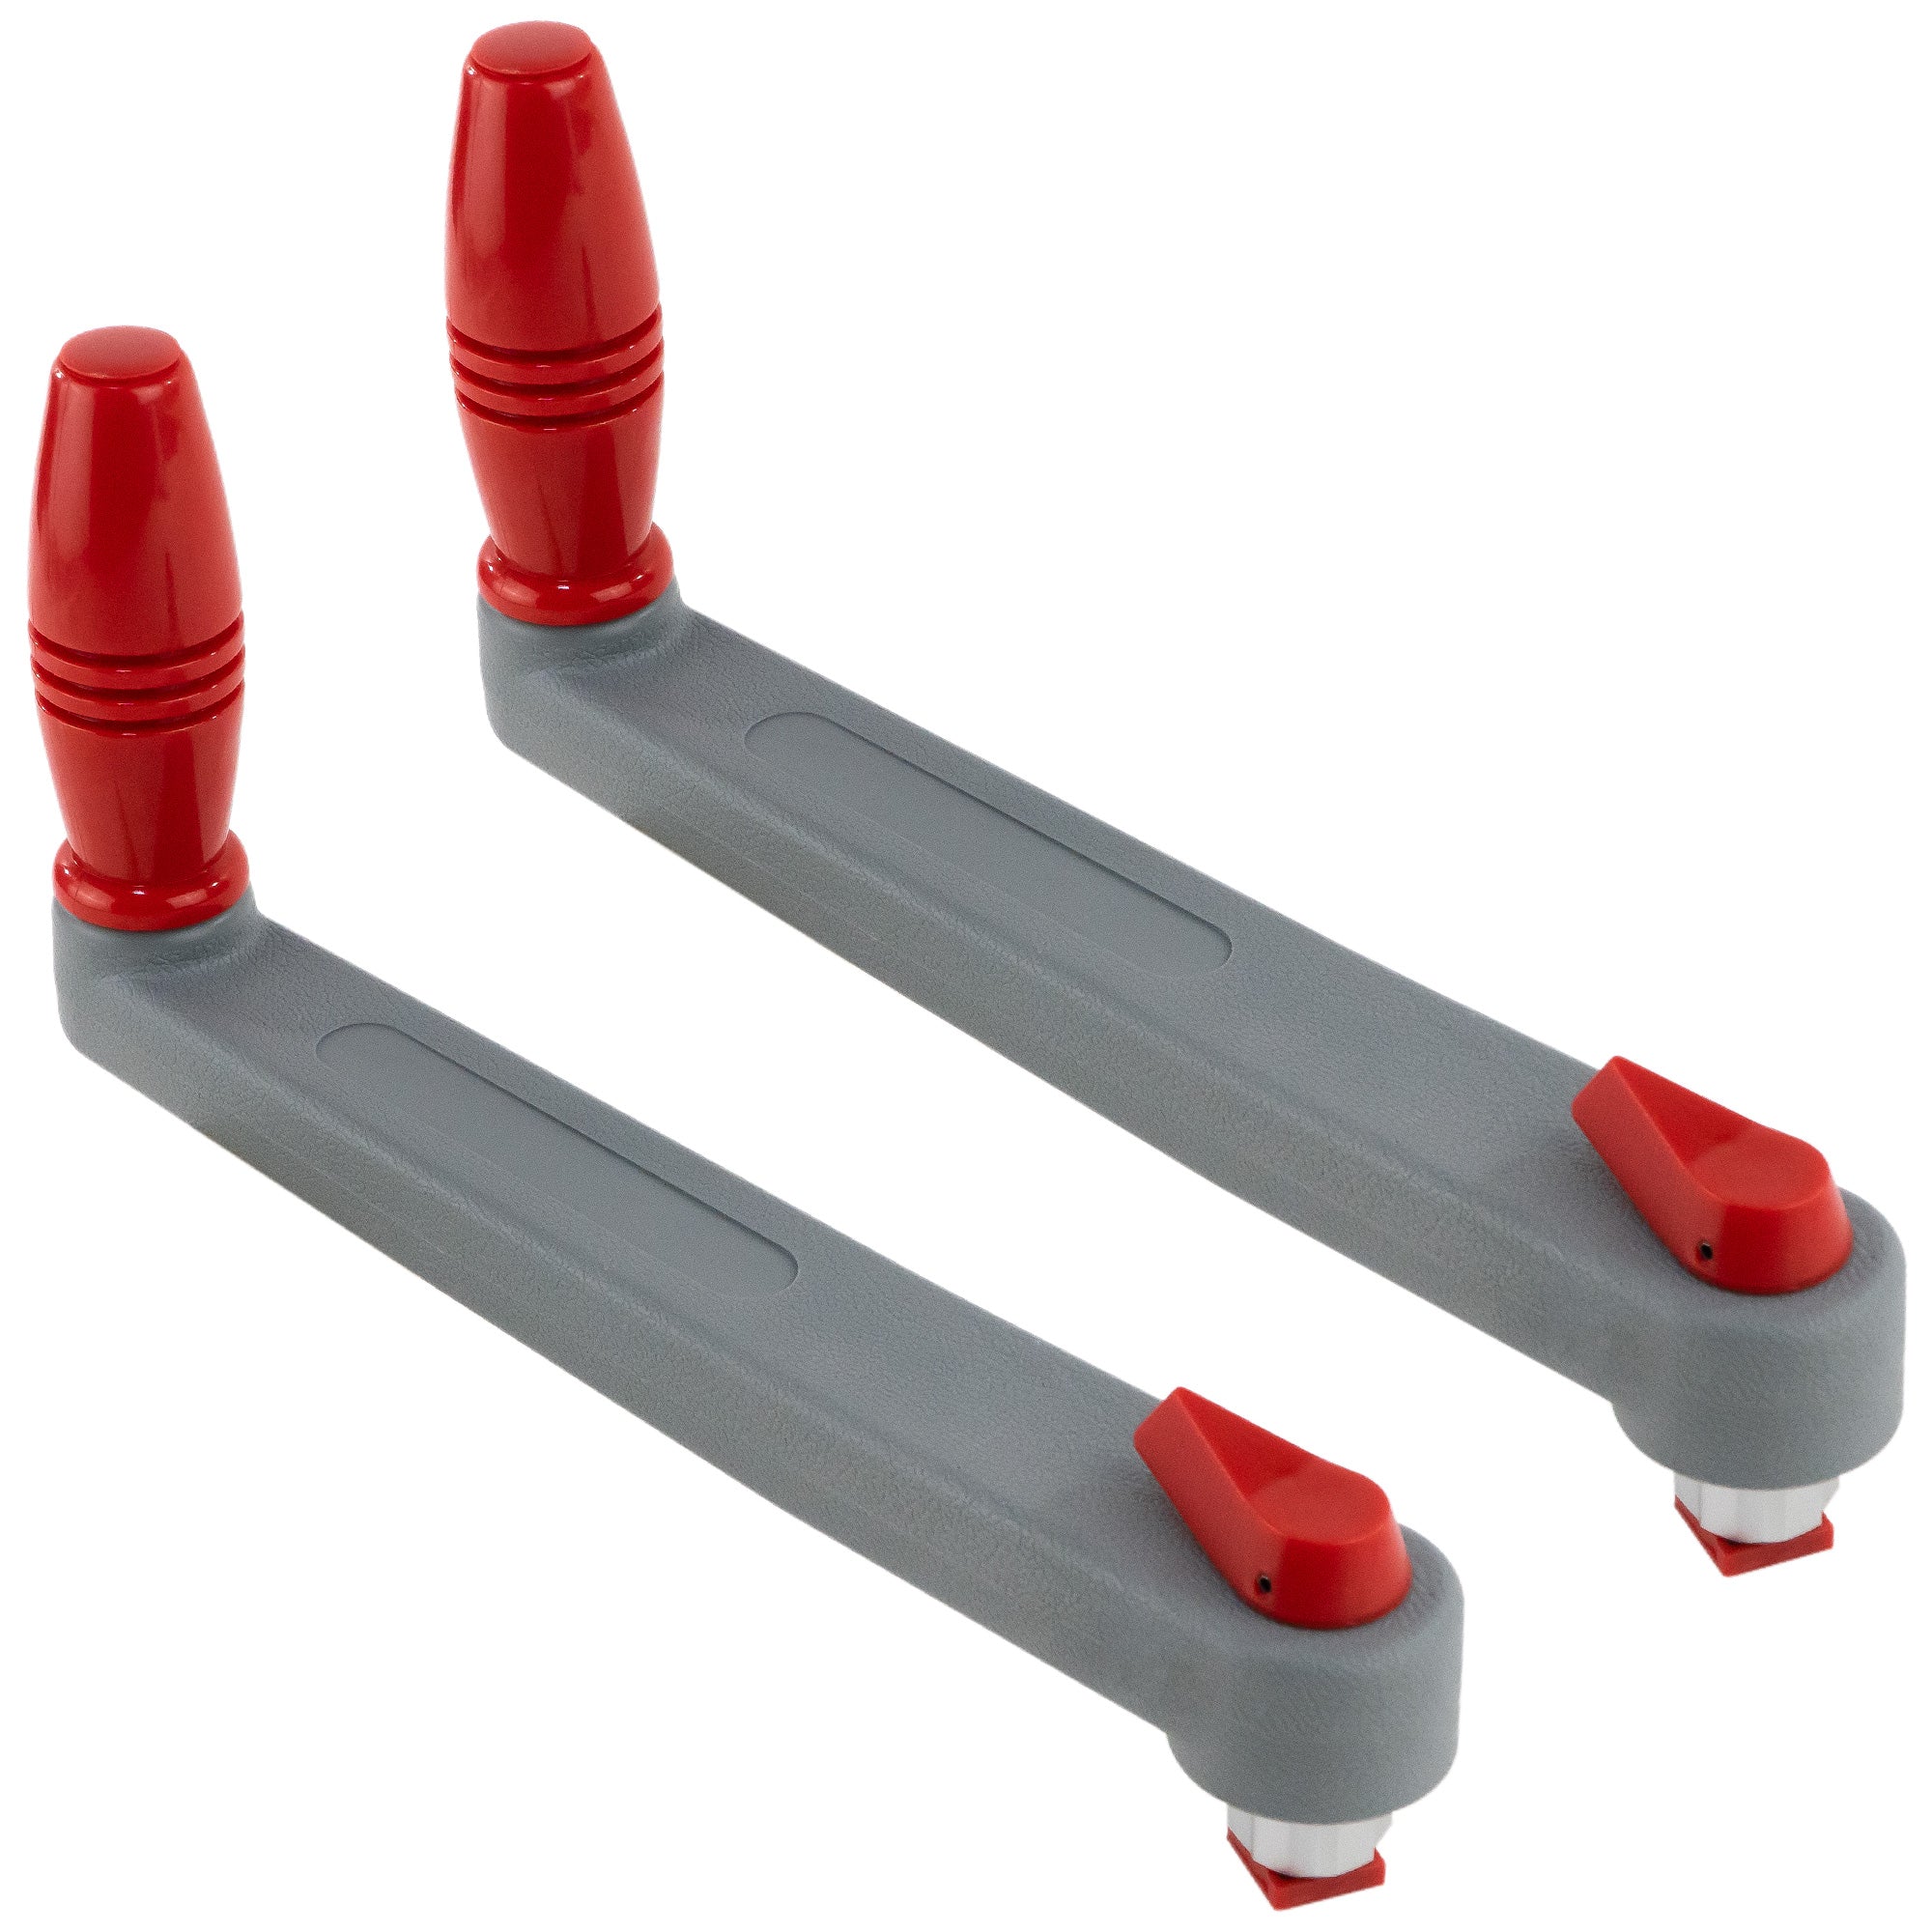 8" Universal Floating Lock-in Winch Handle, Grey/Red, 2-Pack - FO3923-M2